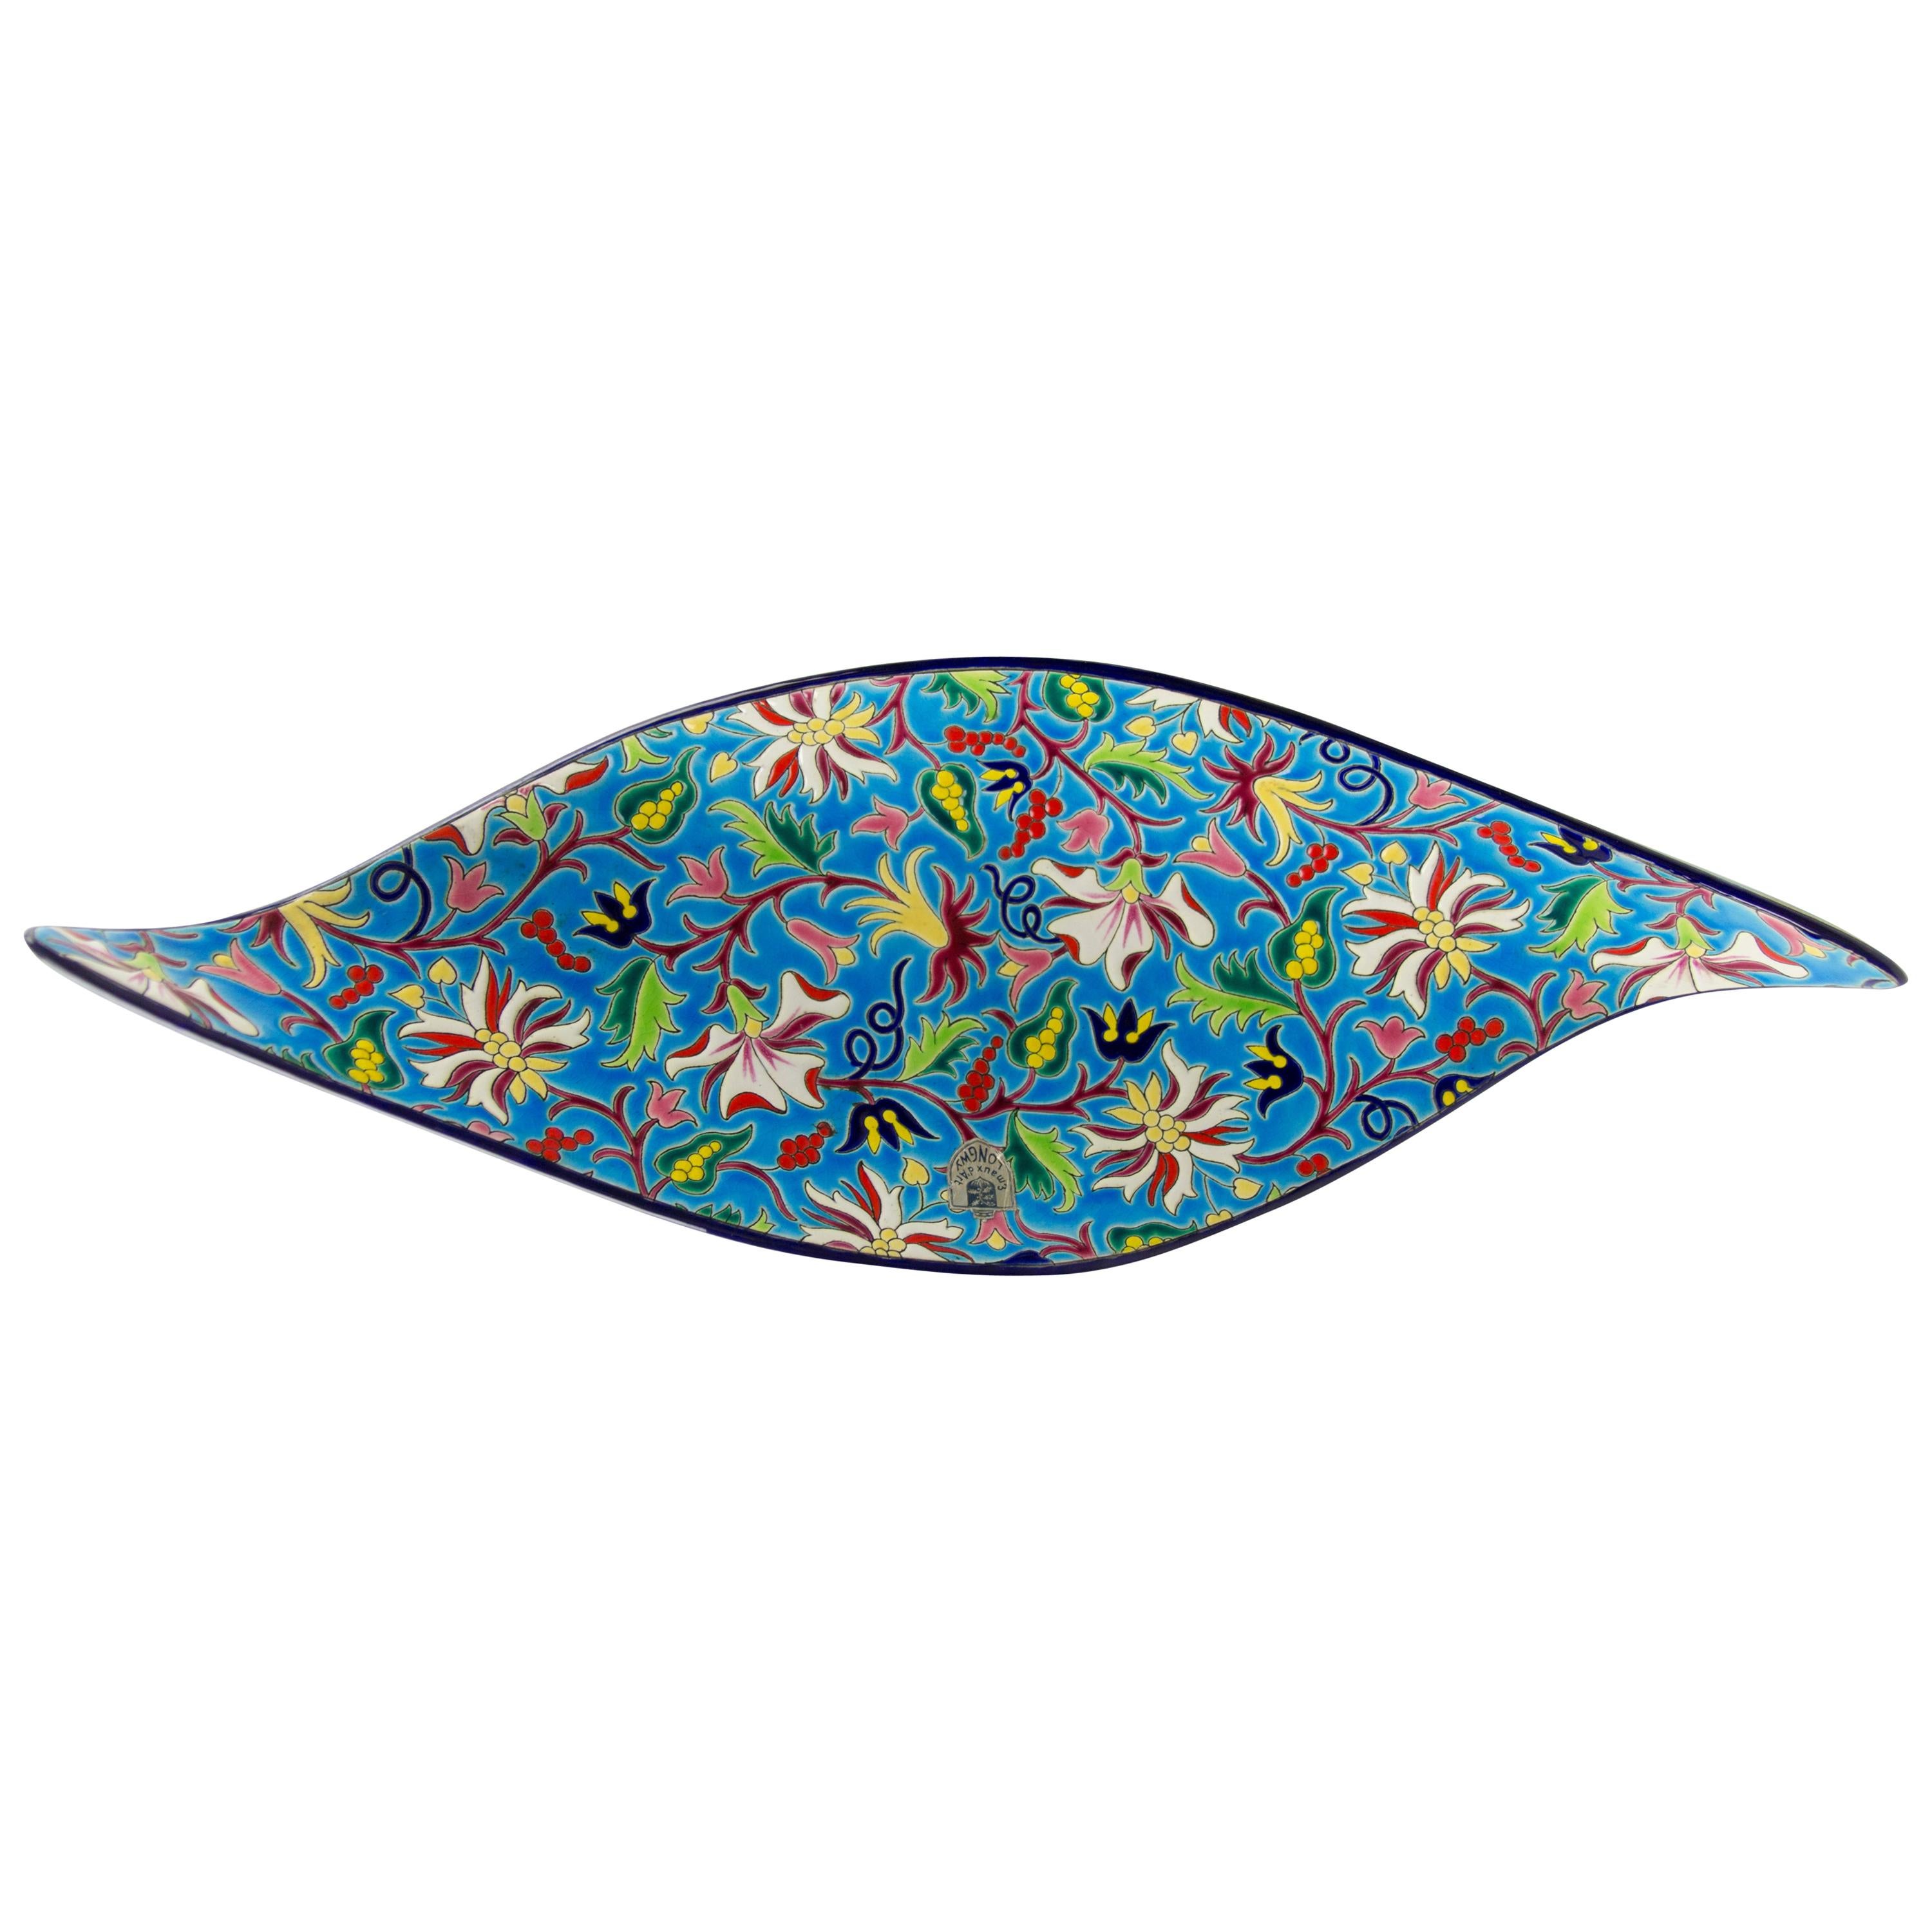 Floral and Turquoise Ceramic Fruit Platter by Manufacture of Longwy Enamels For Sale